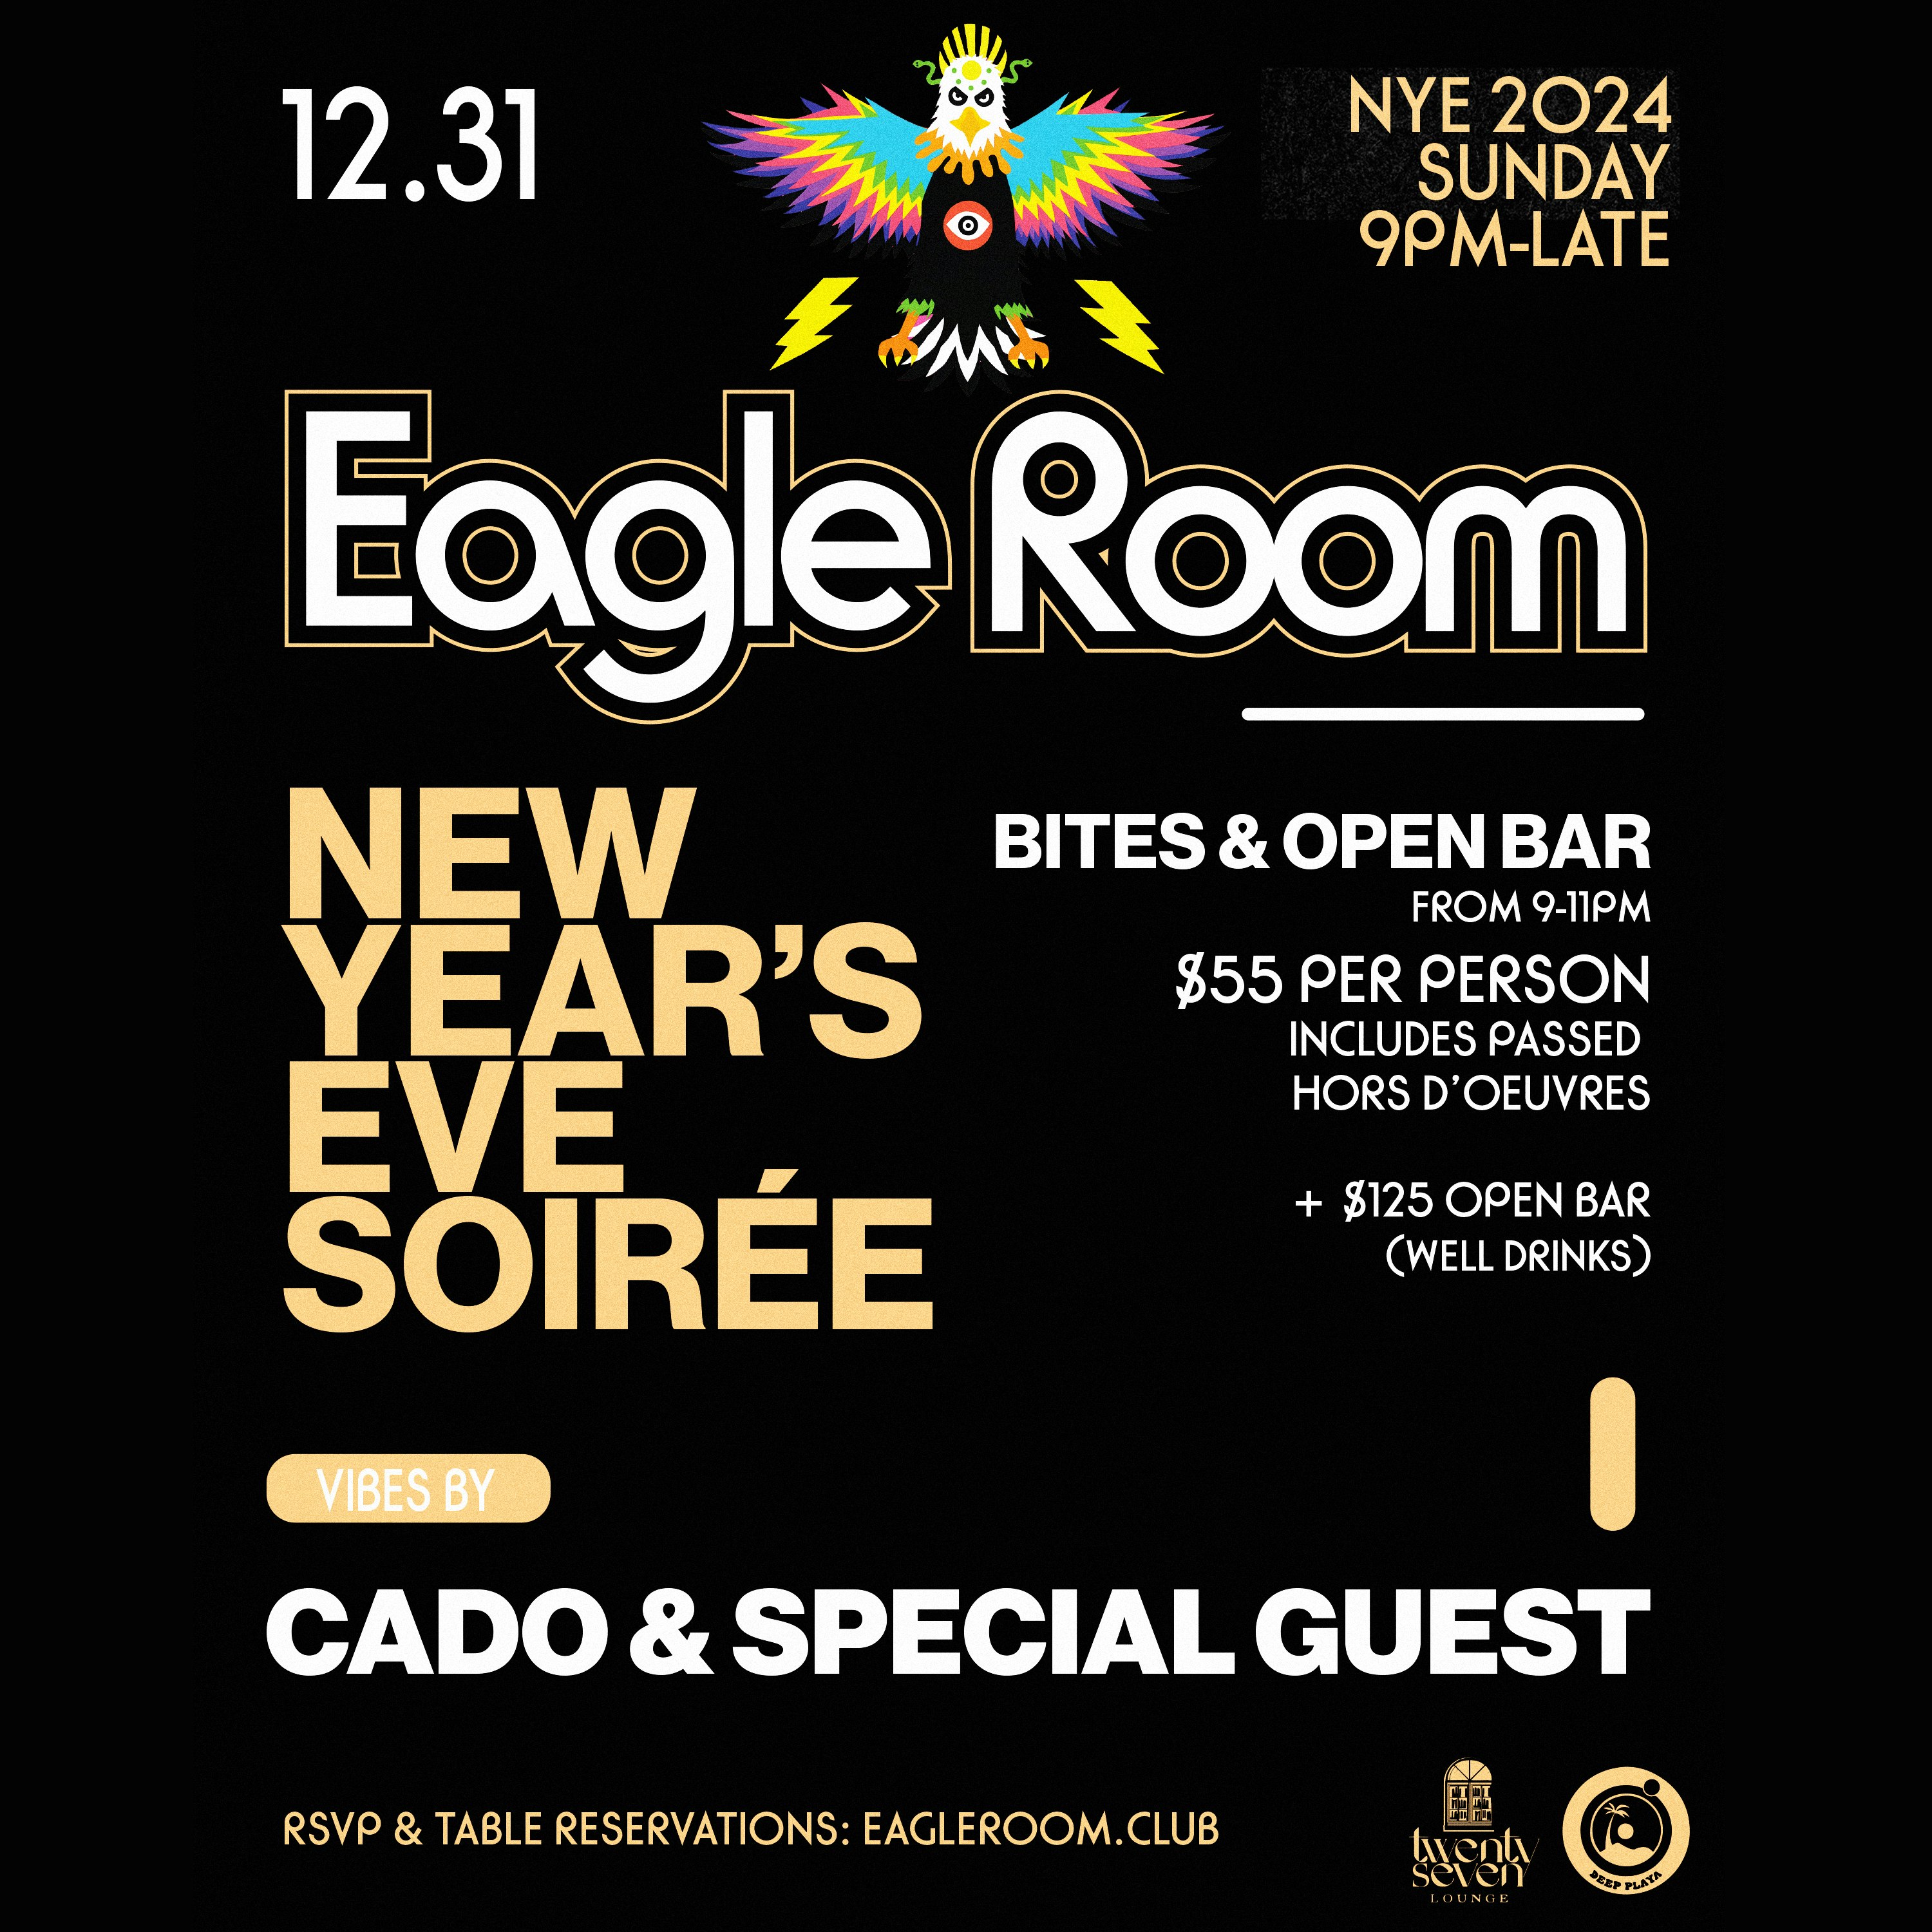 New Year's Eve Soirée | Cado + Special Guest Tickets | Free | 31